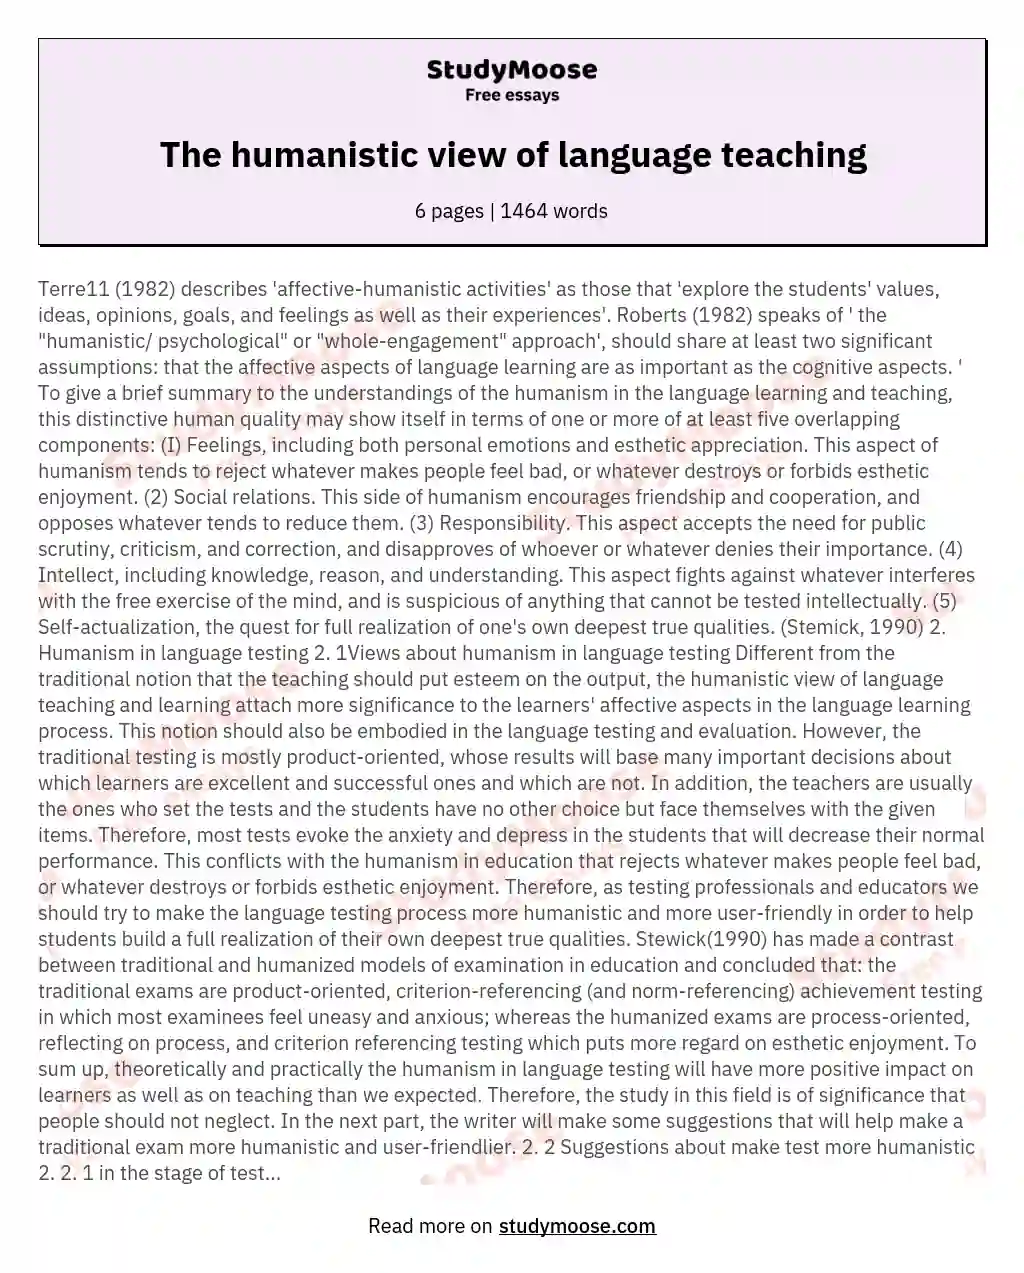 The humanistic view of language teaching essay